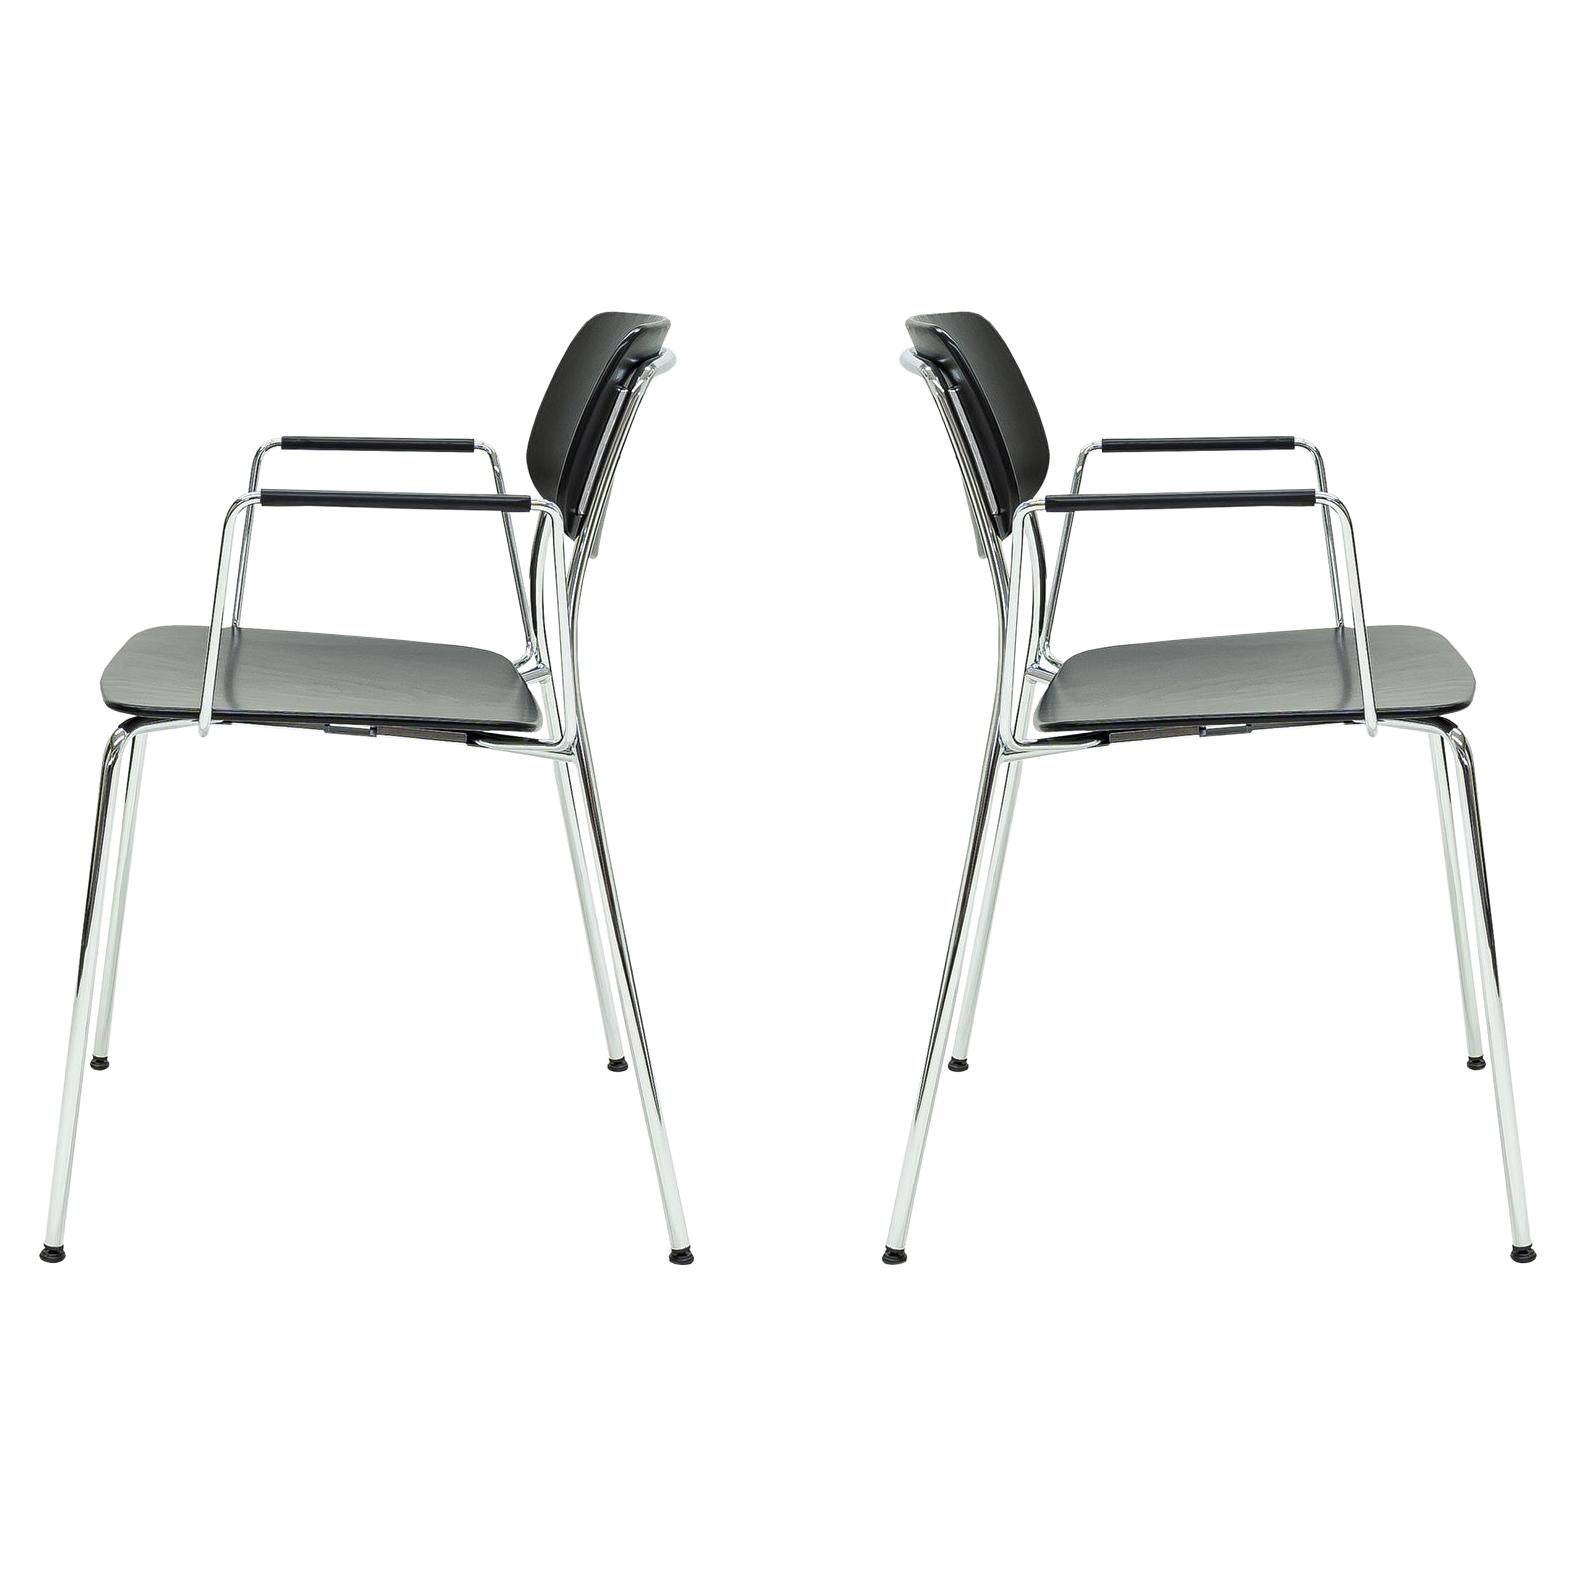 Dietiker Felber C14 Metal Dining Chair with Arms, Modular Design, Set of 2 For Sale